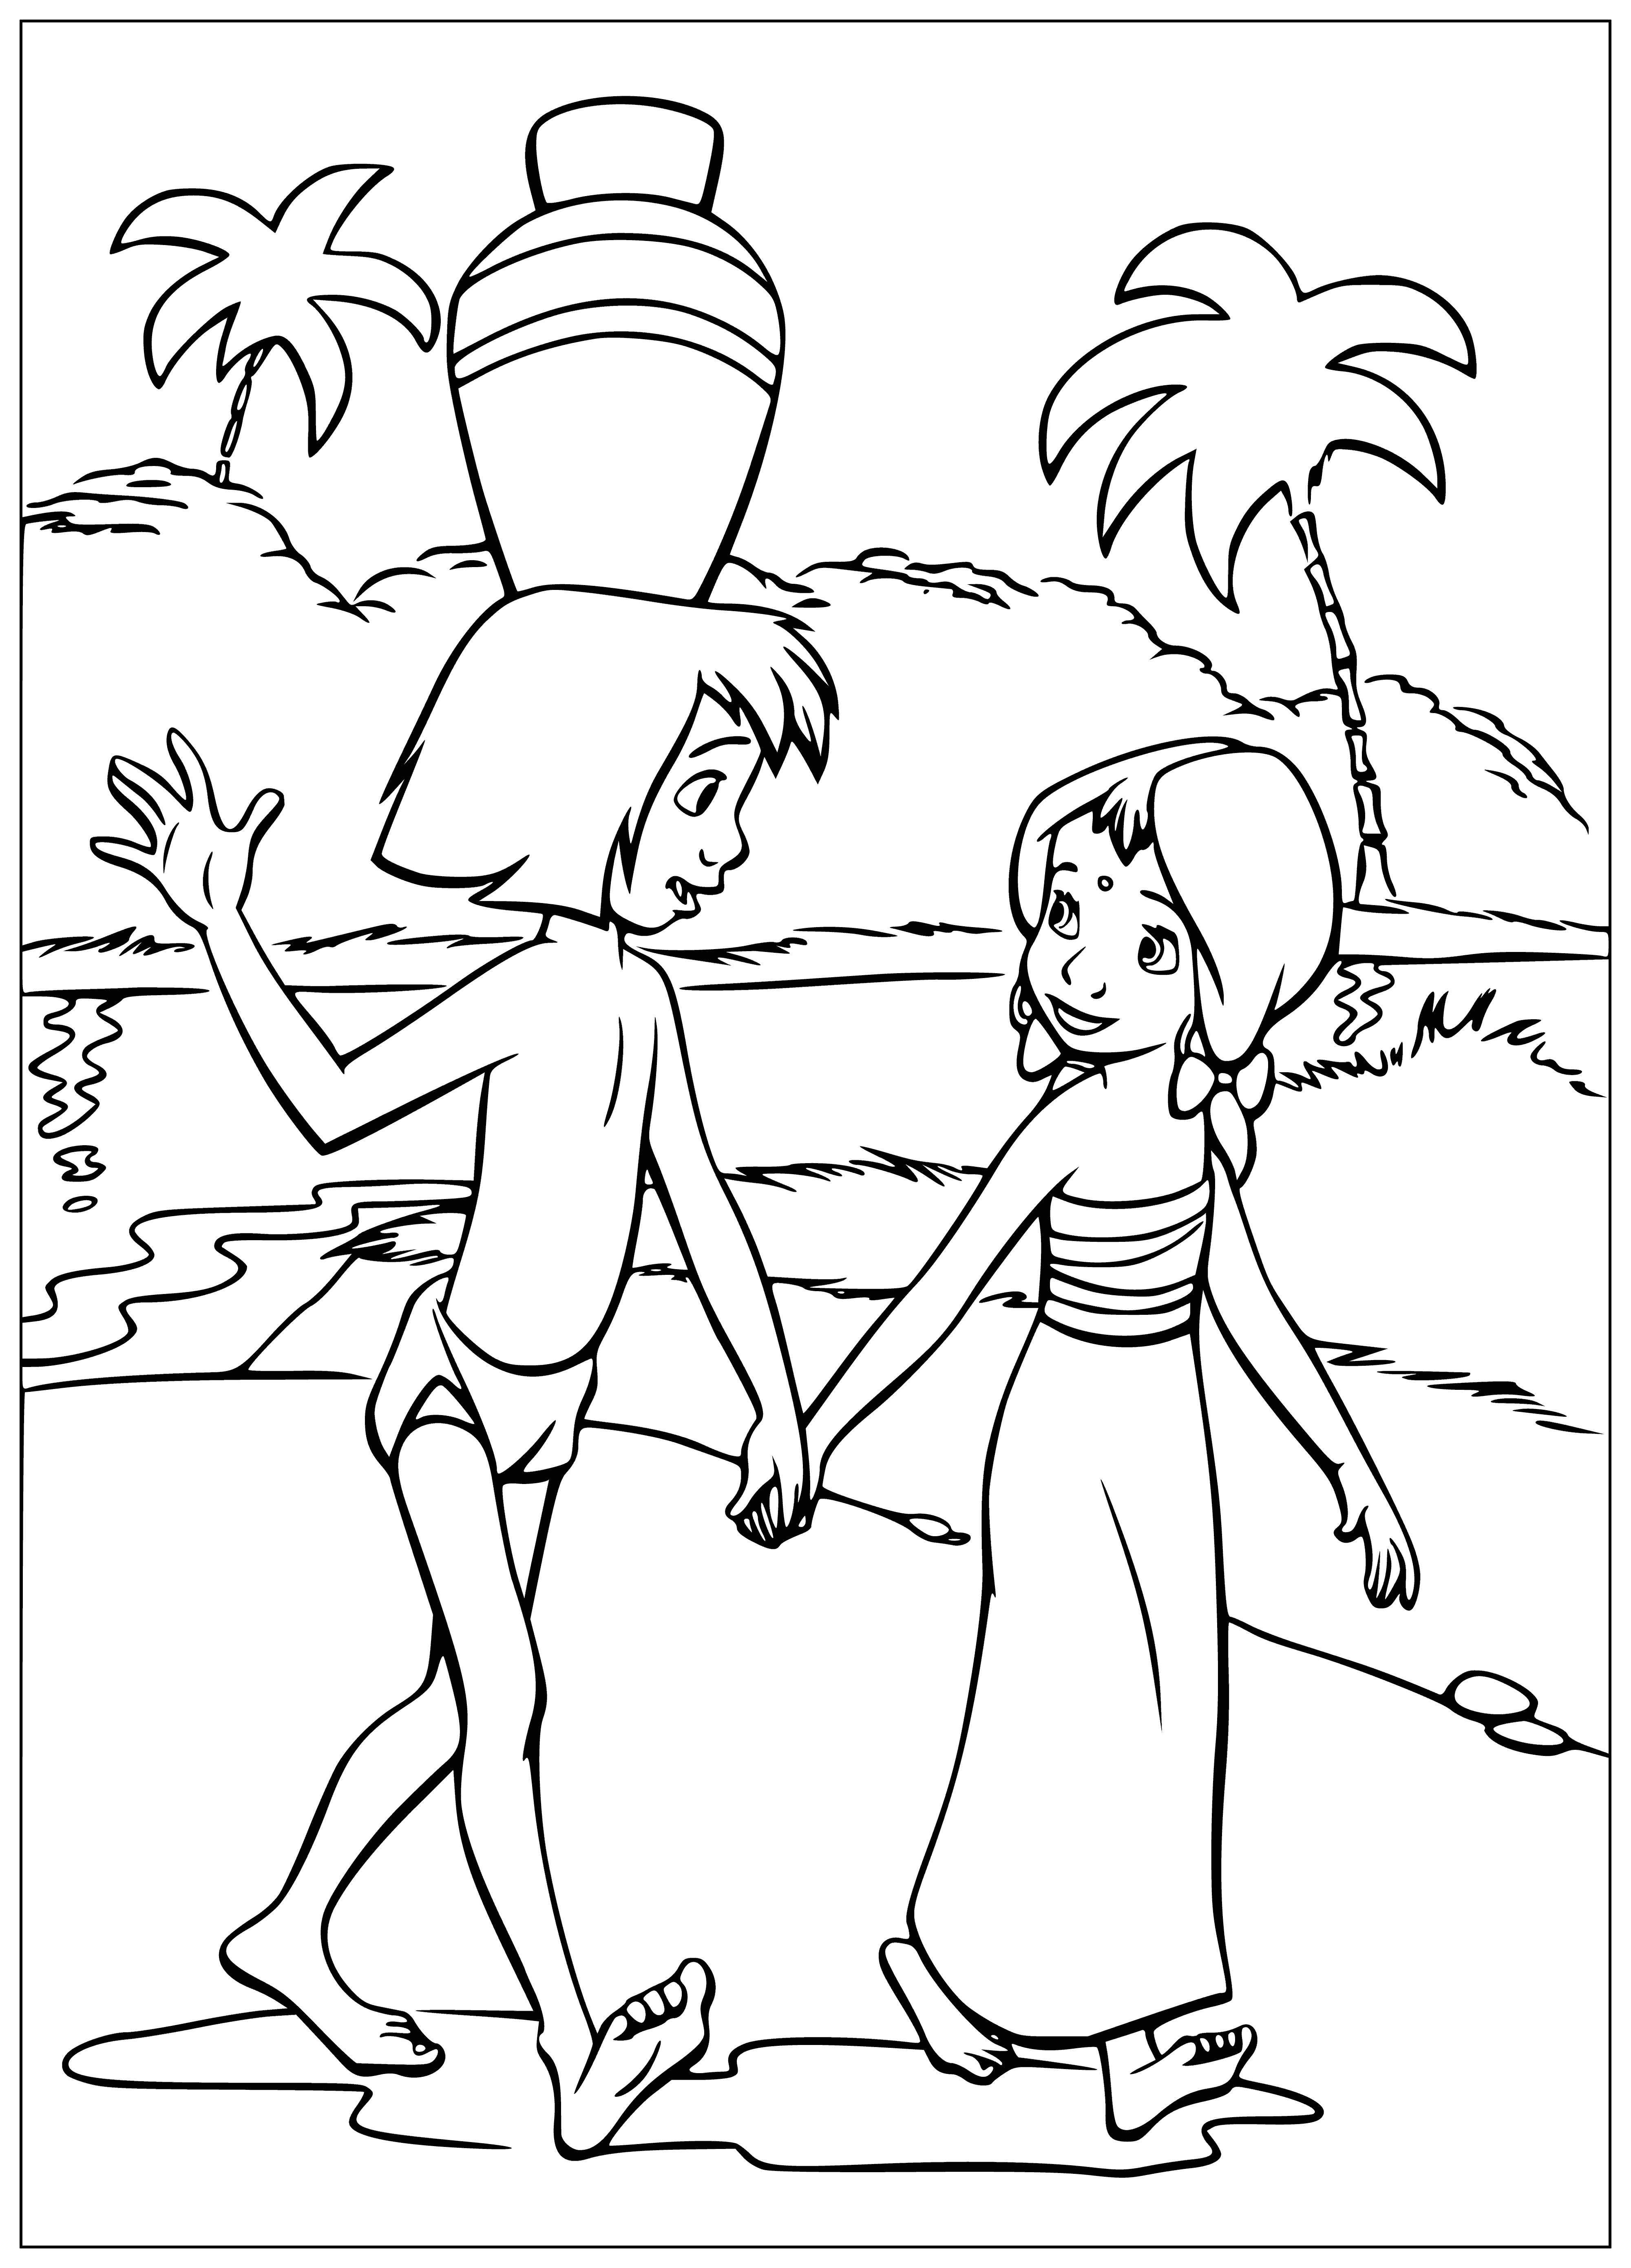 coloring page: Mowgli and girlfriend wear casual shirts/jeans, barefoot in front of a bright background.